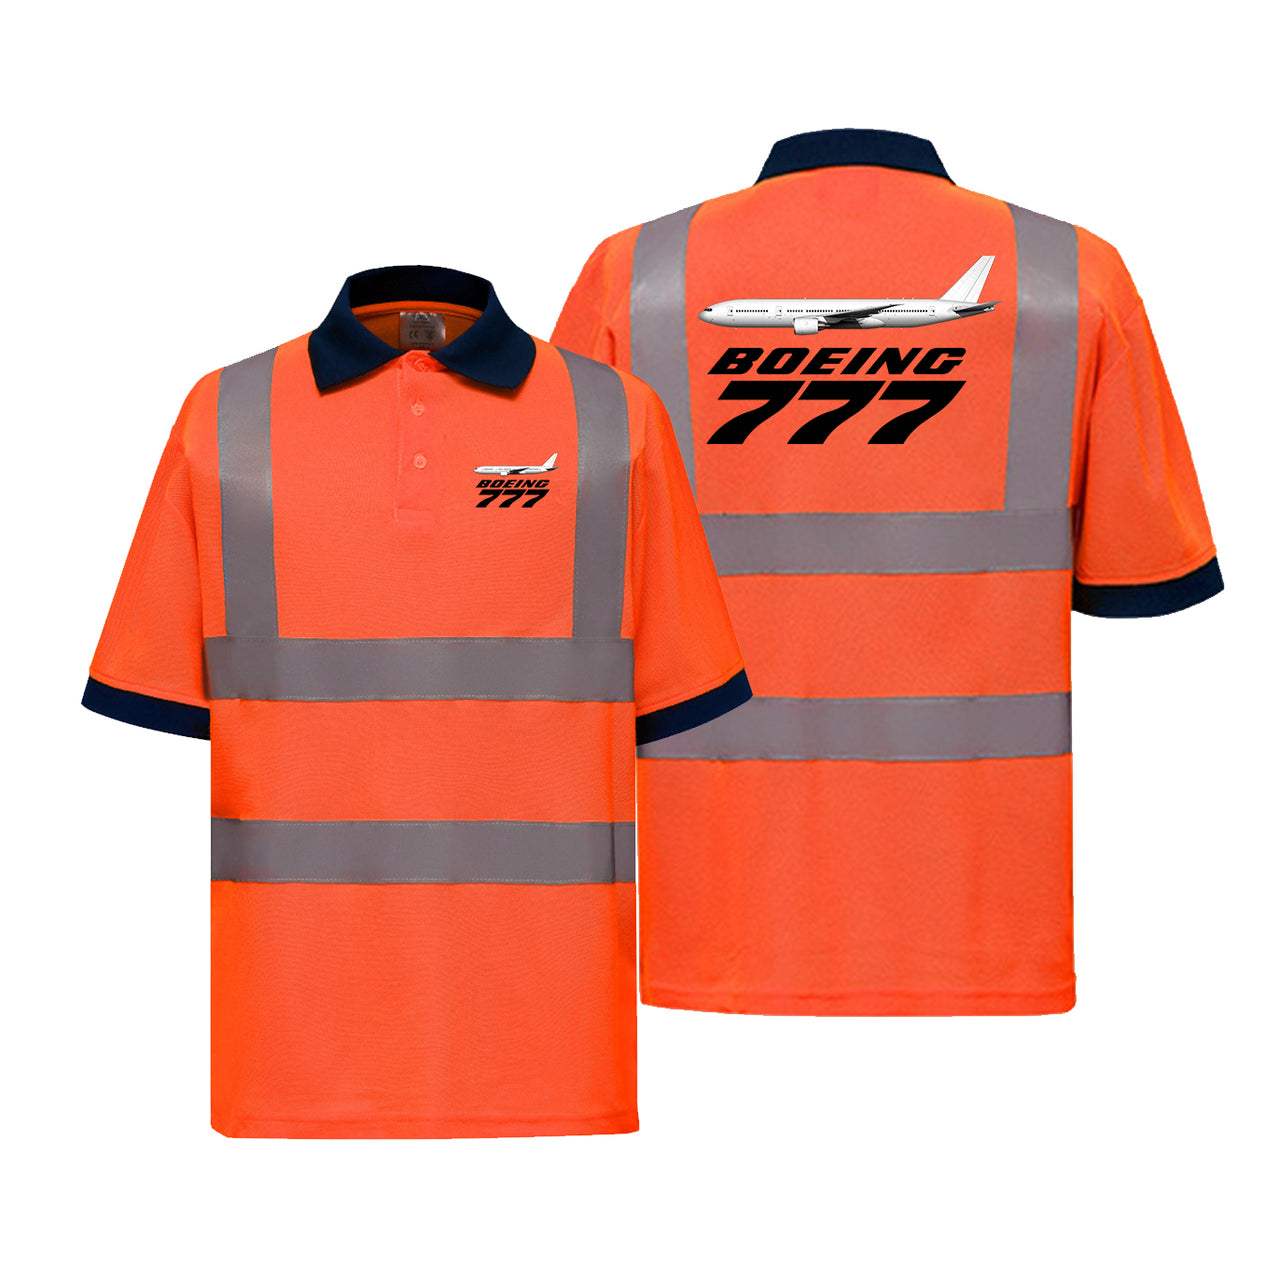 The Boeing 777 Designed Reflective Polo T-Shirts